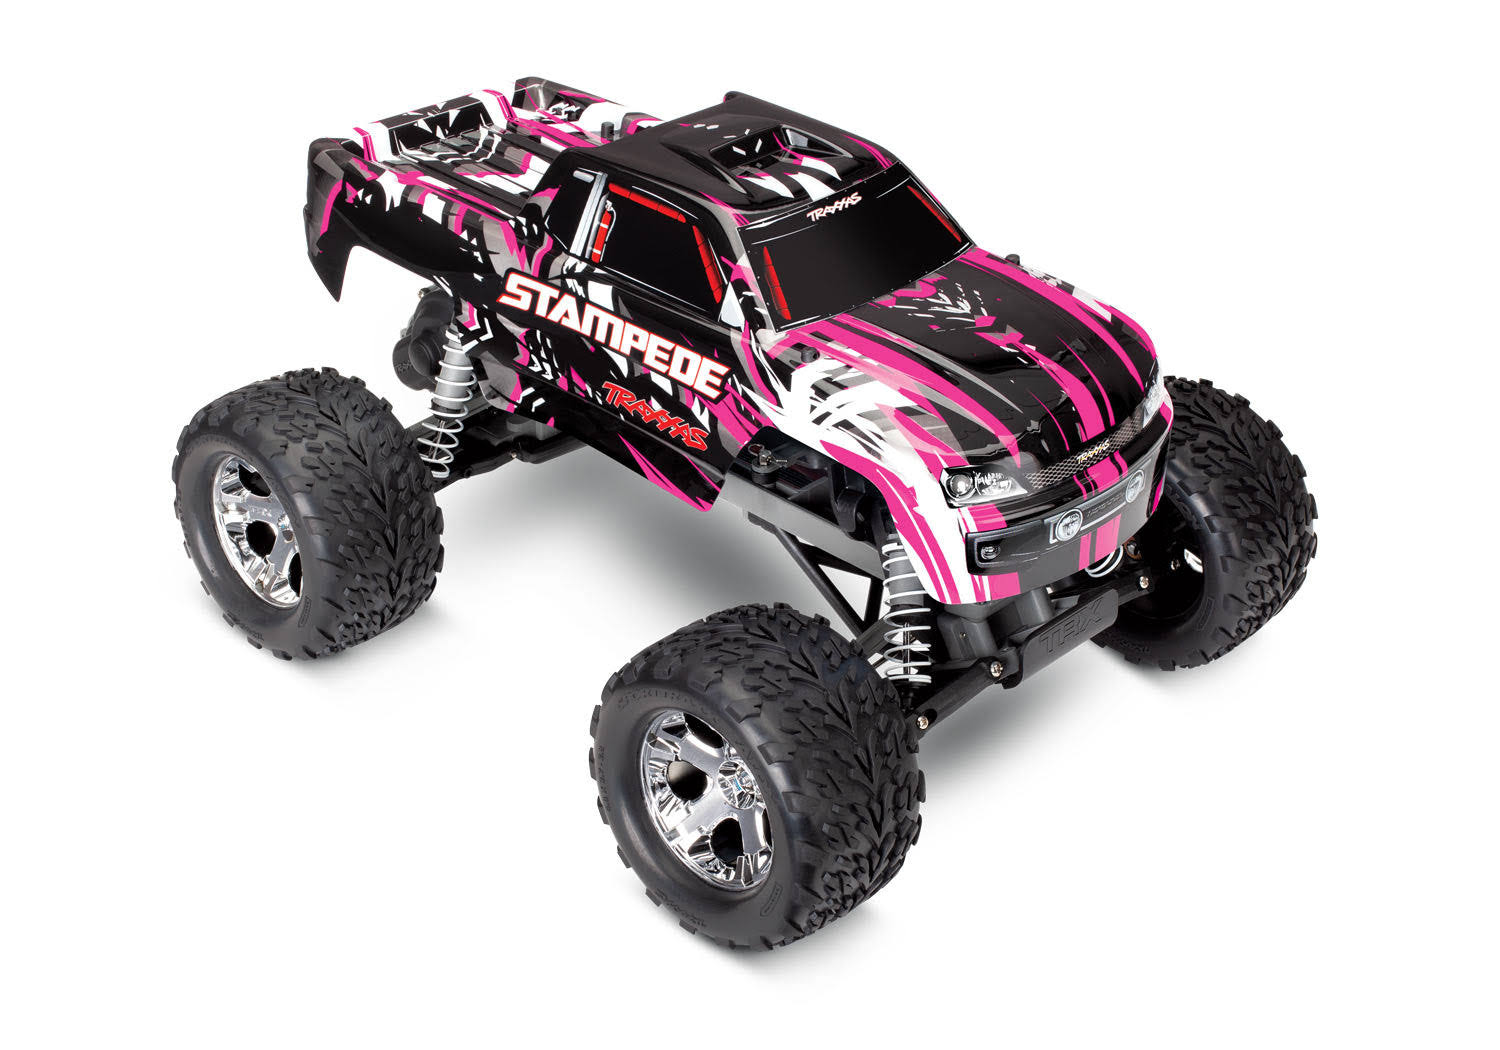 Traxxas 36054-1 Stampede XL-5 2WD Monster Truck 2.4GHz RTR + Battery + Charger